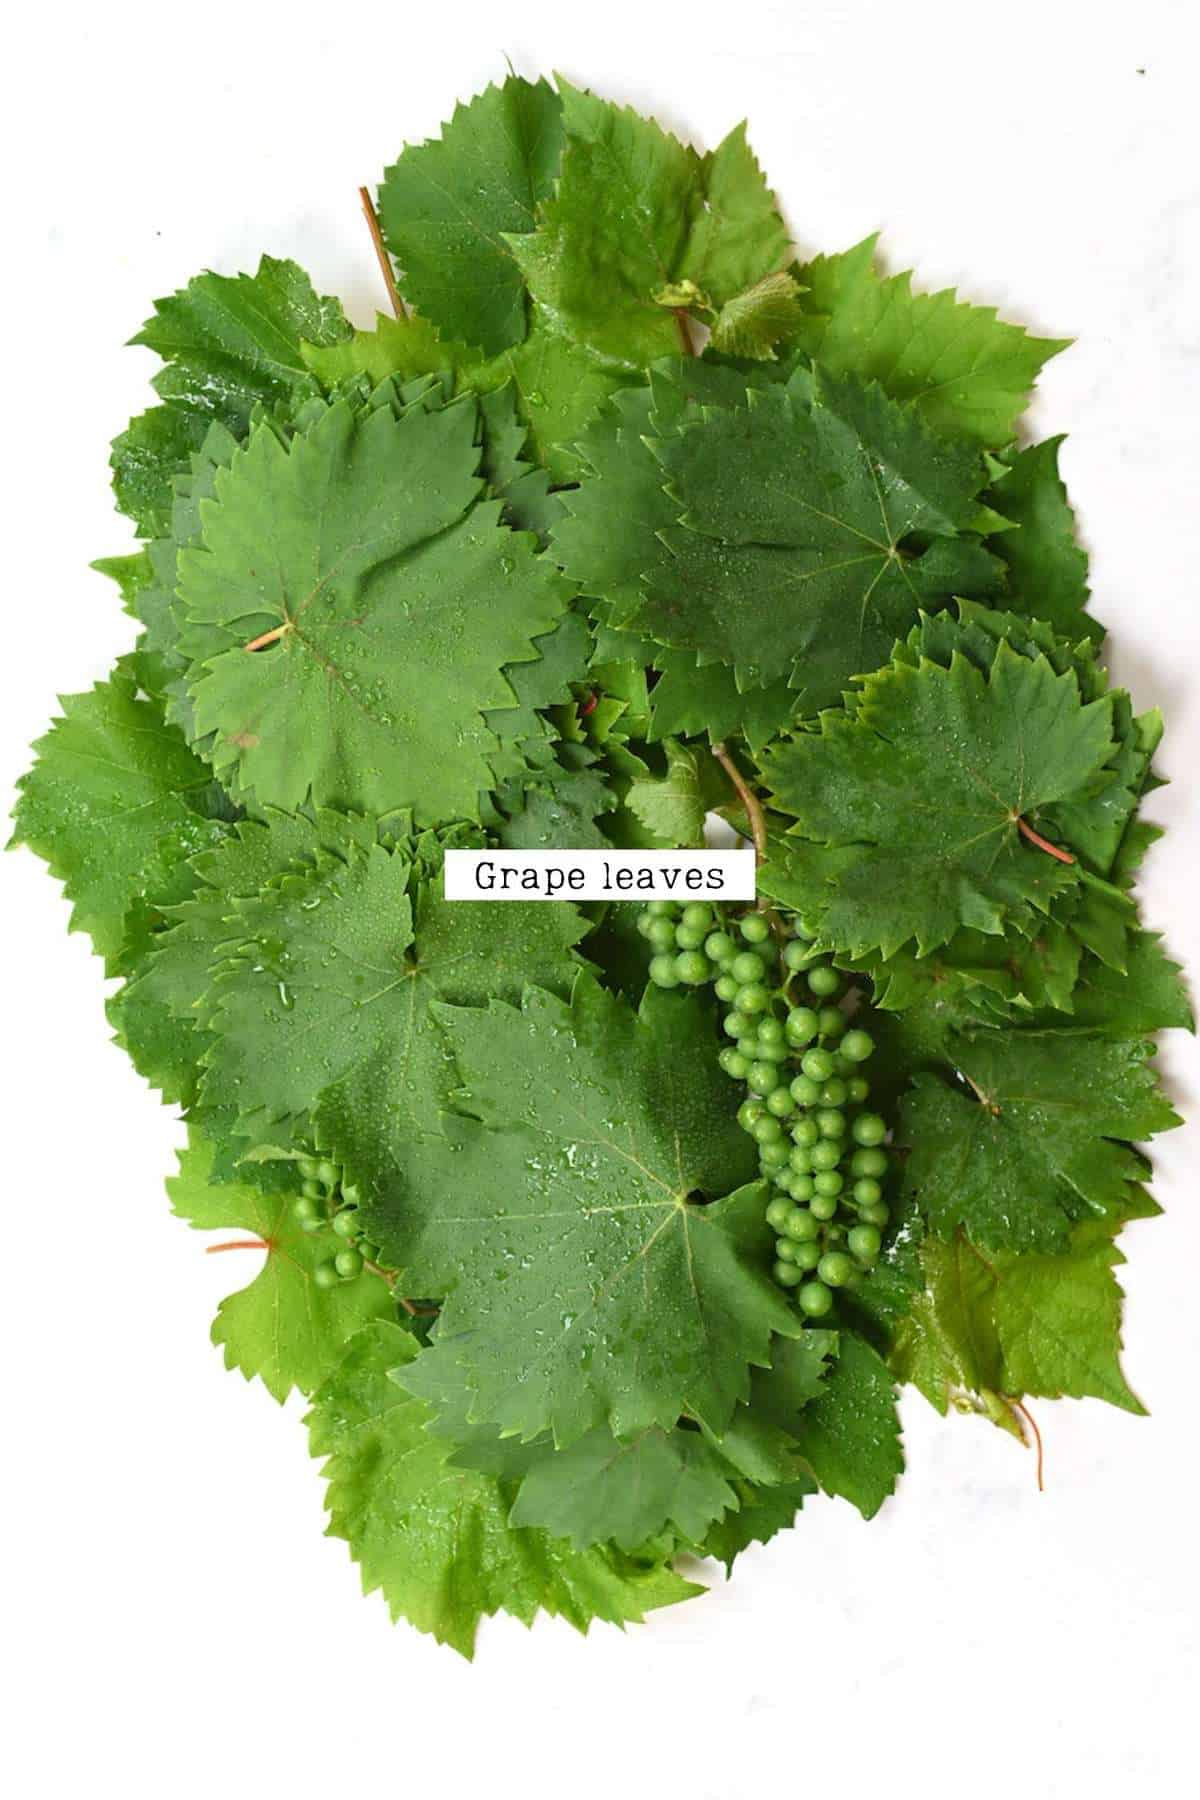 A stack of grape leaves